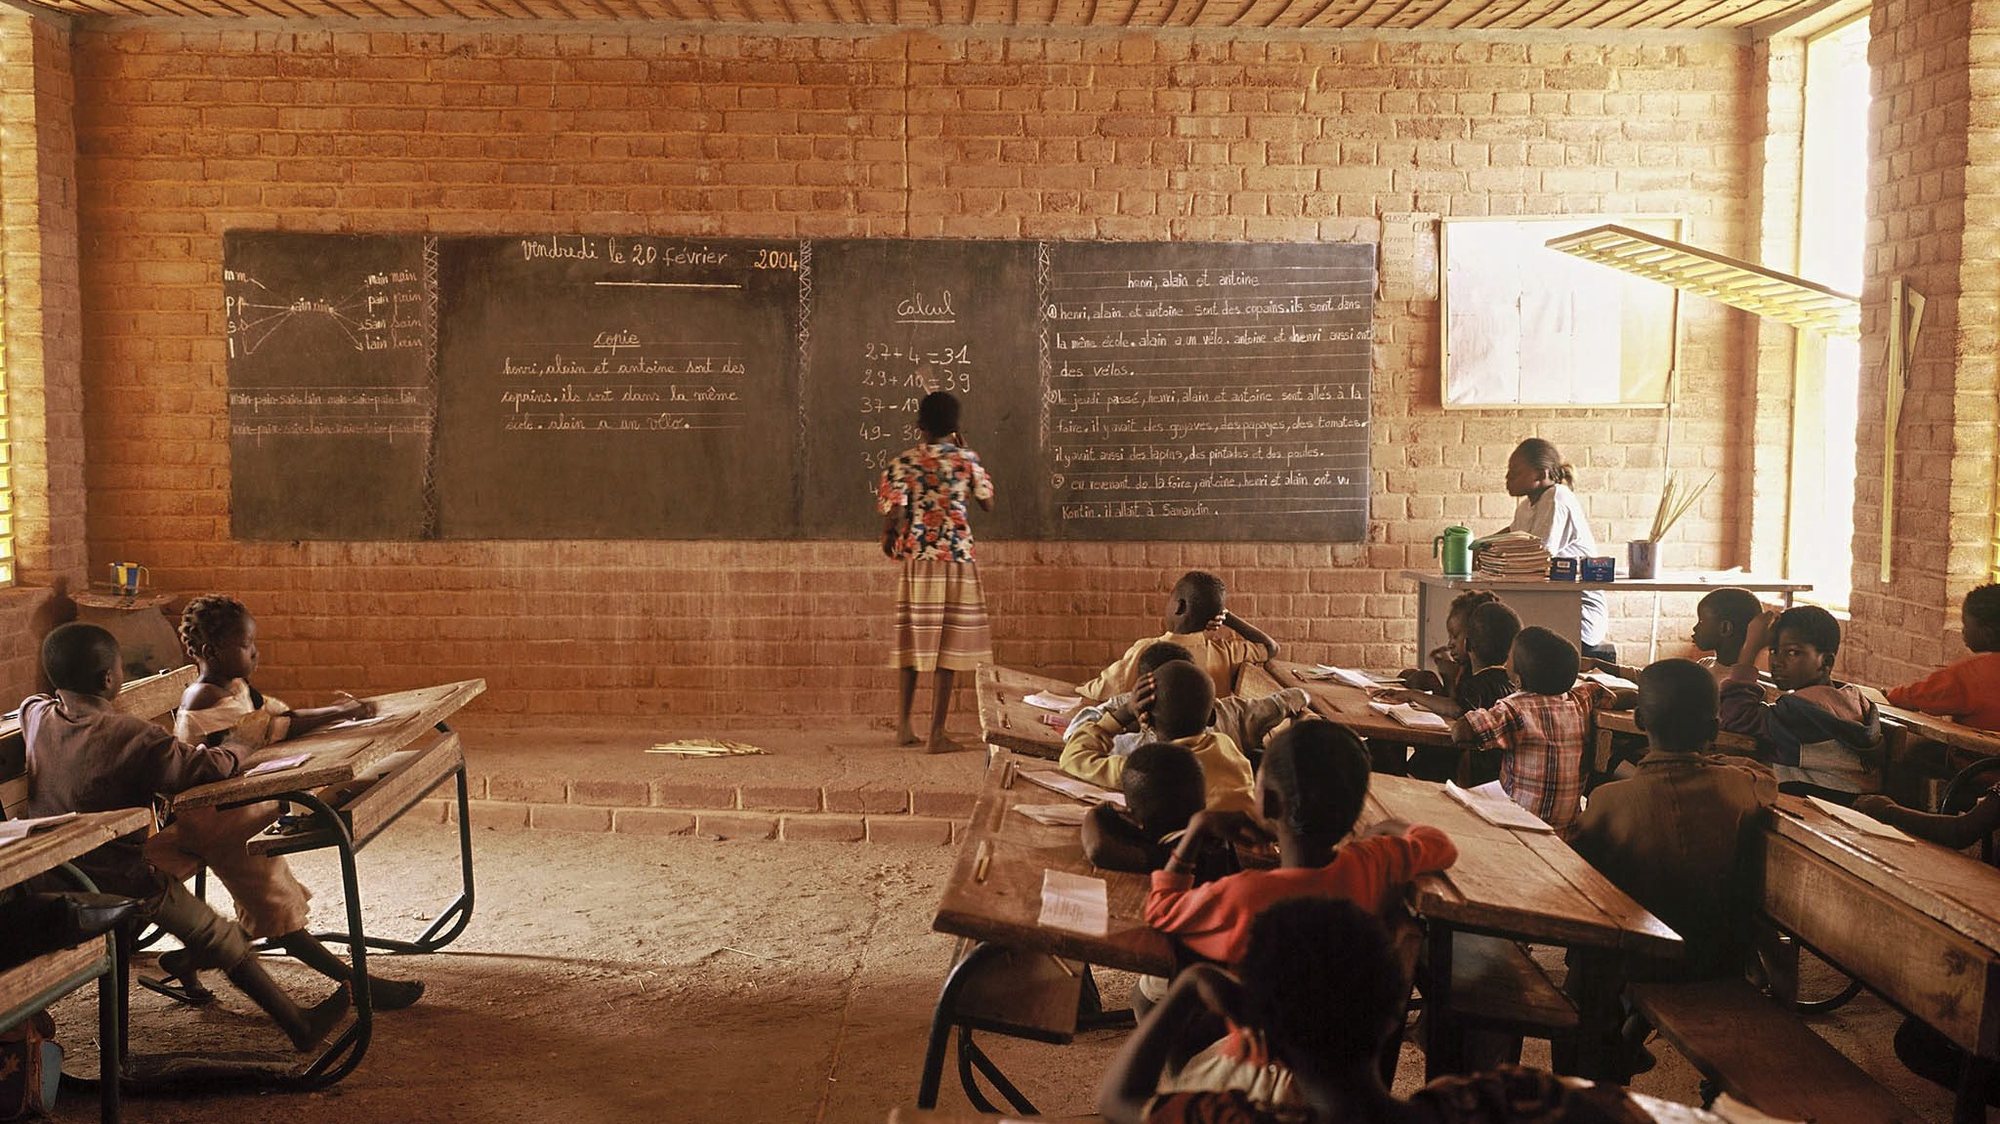 Children sit inside a classroom in an innovative school design in Gando, Burkina Faso. The Primary School won the 2004 Aga Khan Award for Architecture on 28 November 2004 for projects that have attained the highest international standards of architectural excellence while reflecting the values of the primarily Muslim societies the projects are intended to serve. The primary school &quot;goes far beyond its educational programme and exemplifies highest-calibre architectural design employing locally available materials and techniques, training and community participation and empowerment&quot;. EPA/SIMEON DUCHOUD-THE AGA KHAN AWAR